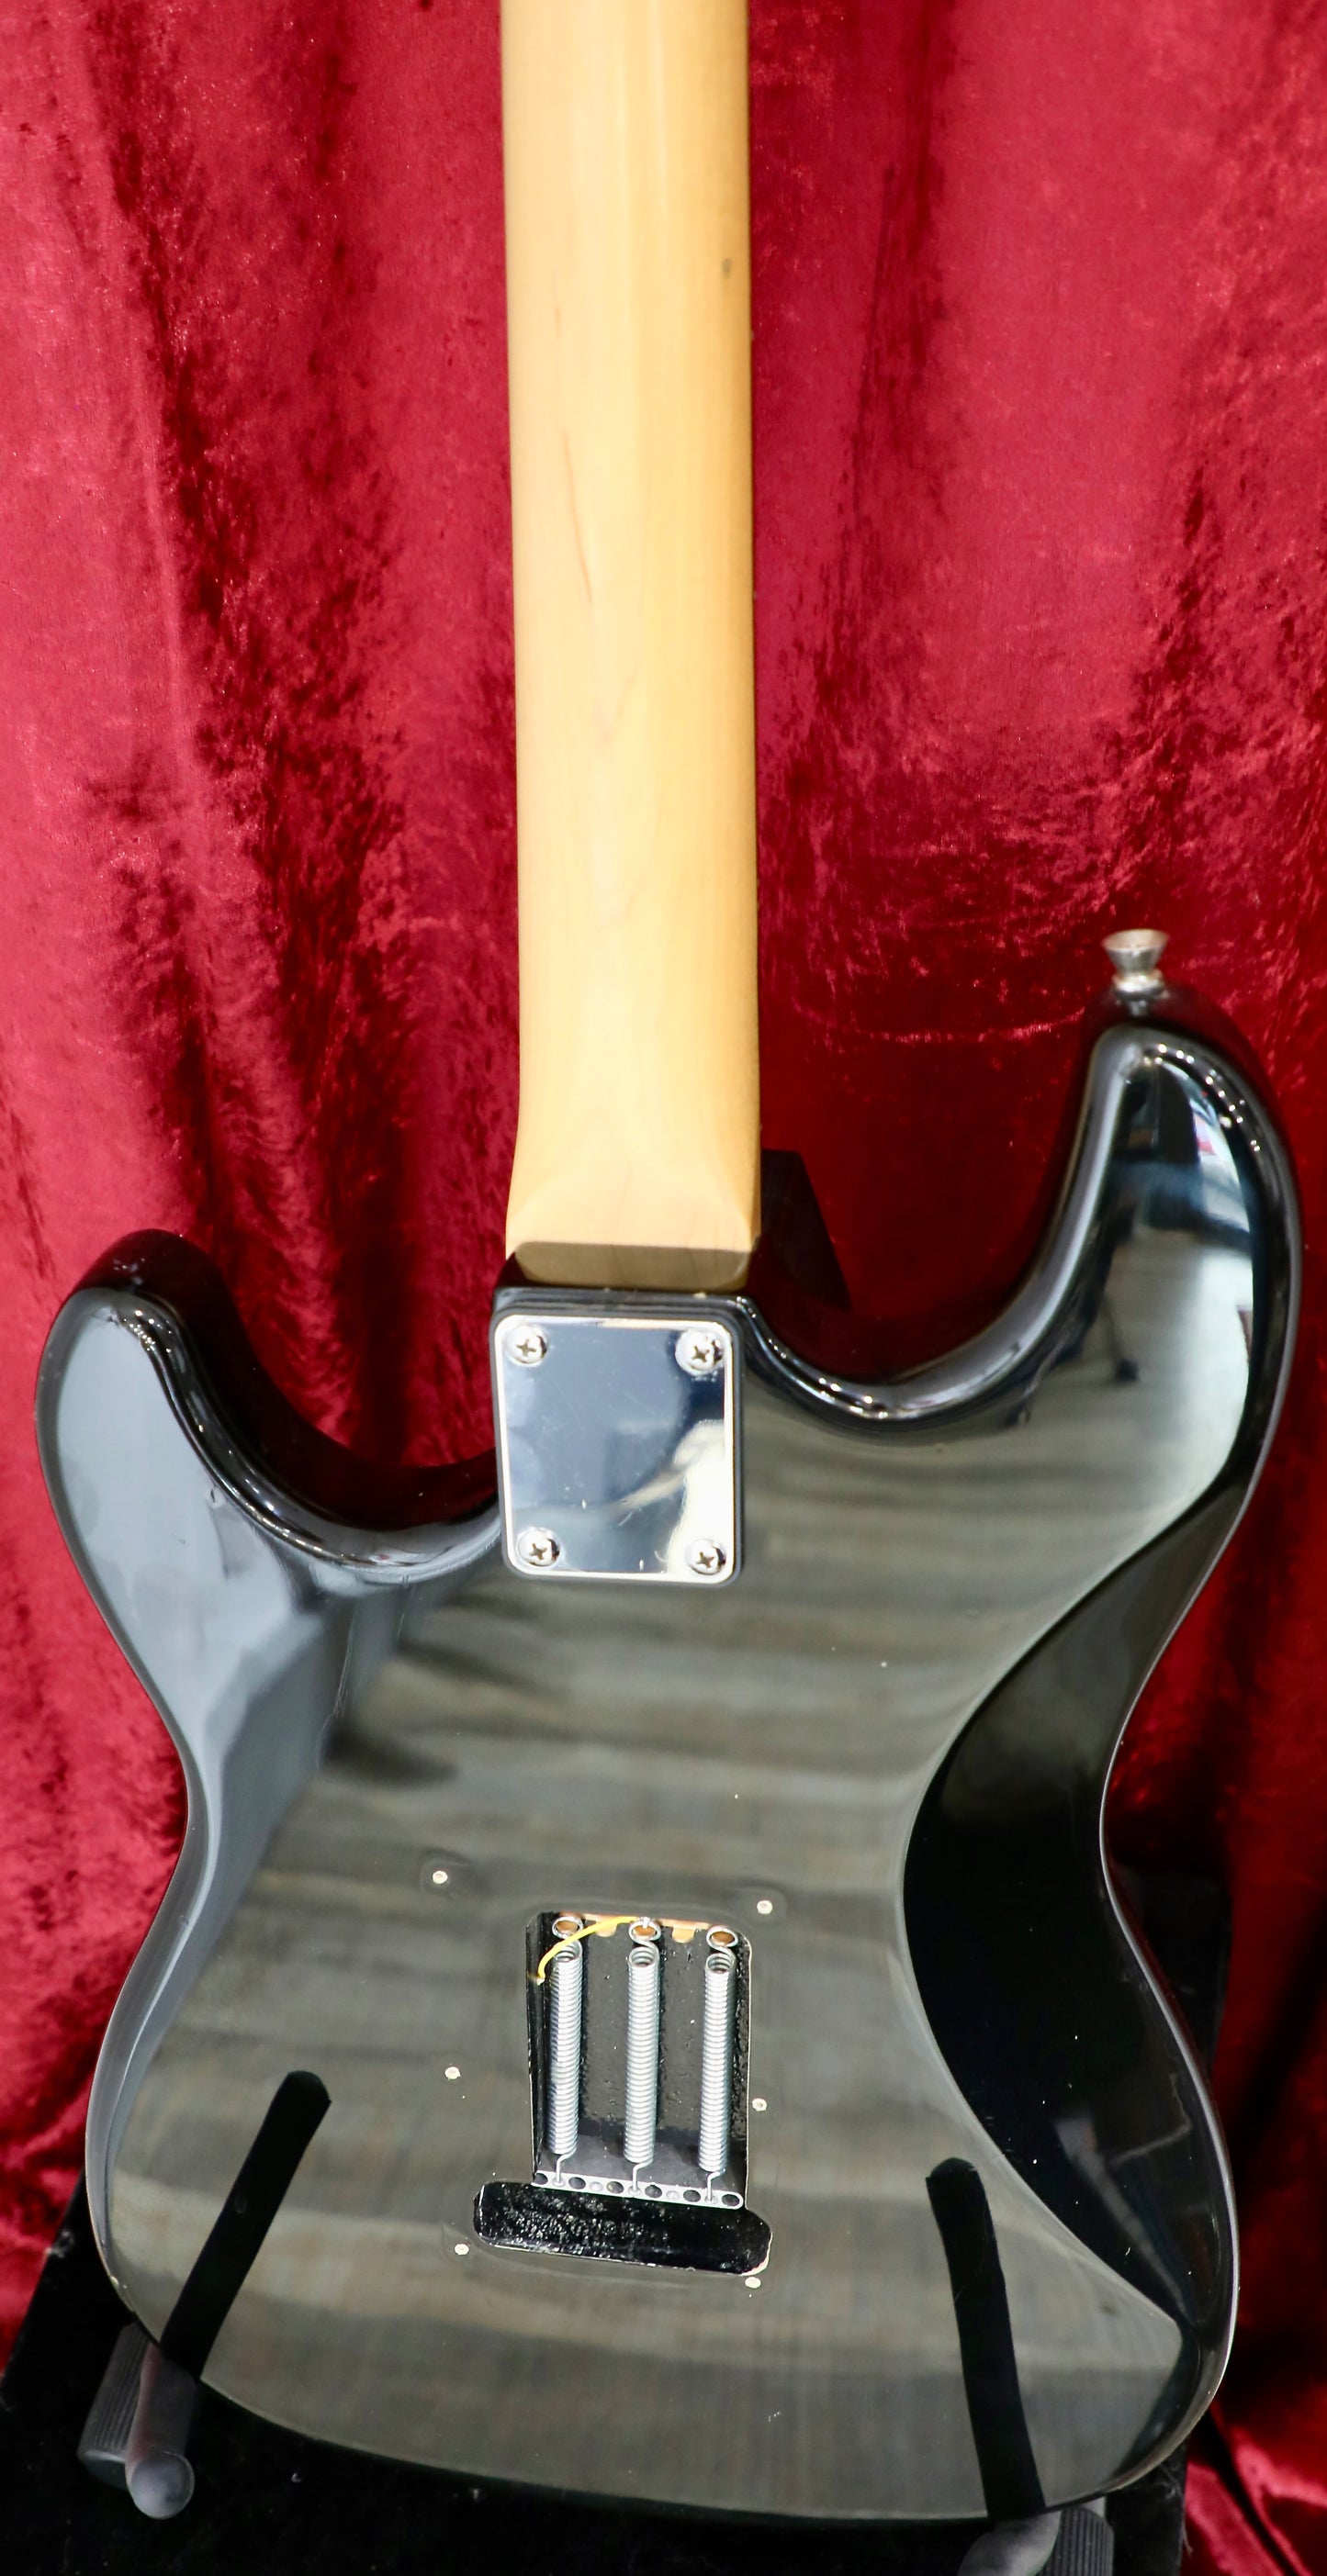 Special Music Brand Stratocaster Style Guitar